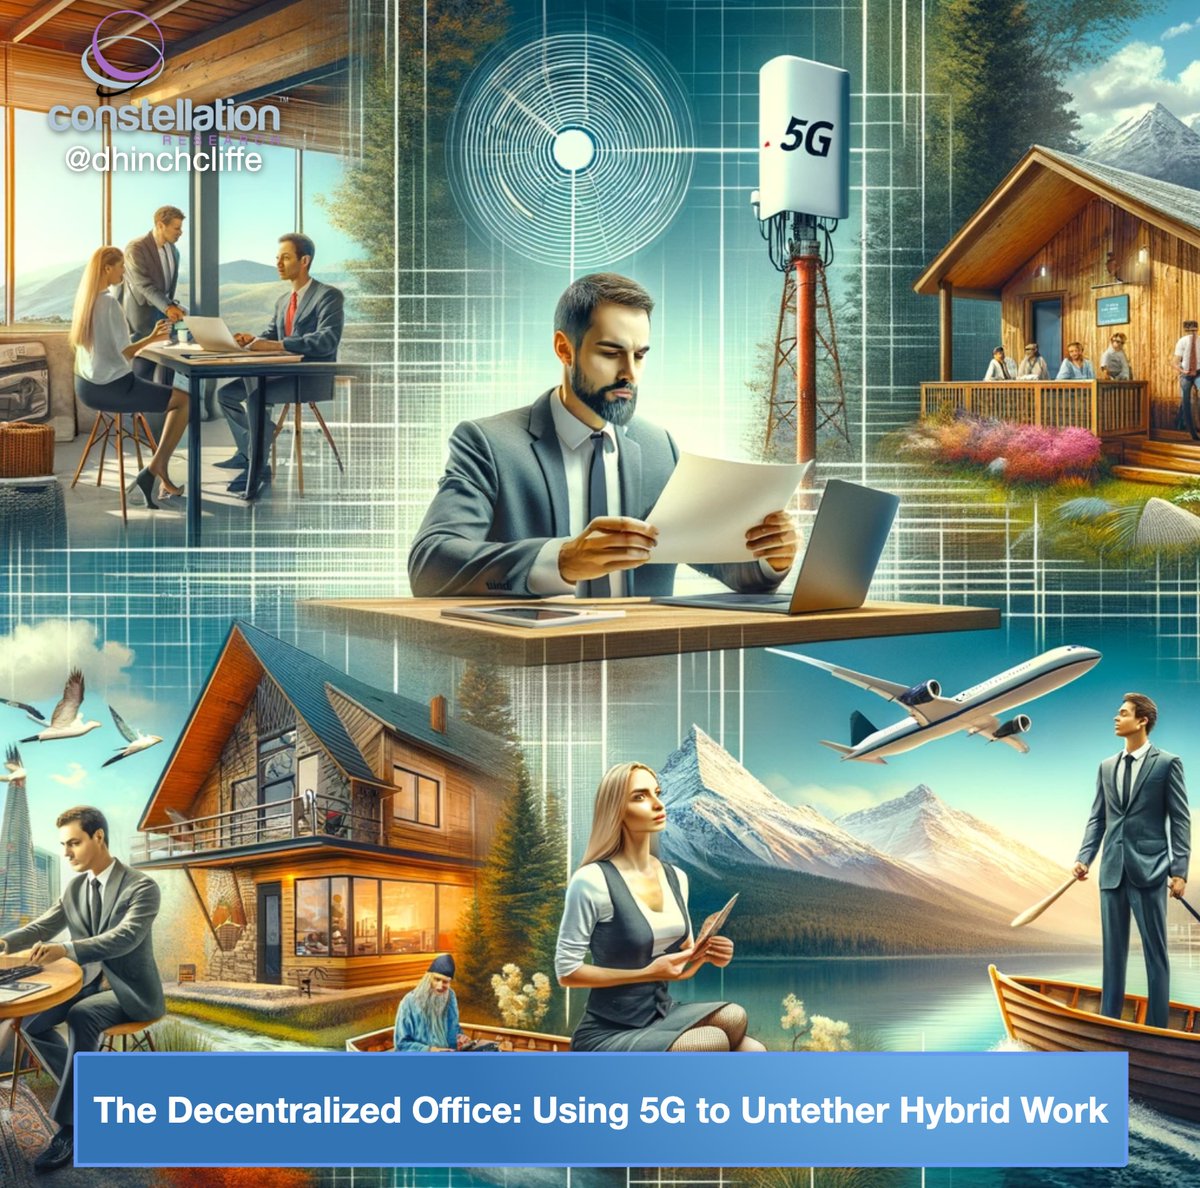 NEW RESEARCH: The Decentralized Office: Unleashing the #HybridWork Revolution with #5G My latest research report explores how IT depts. have key new resources at hand to enable seamless hybrid work at scale: conr.live/5G-Hybrid-Work… #digitalworkplace #employeeexperience #wfa